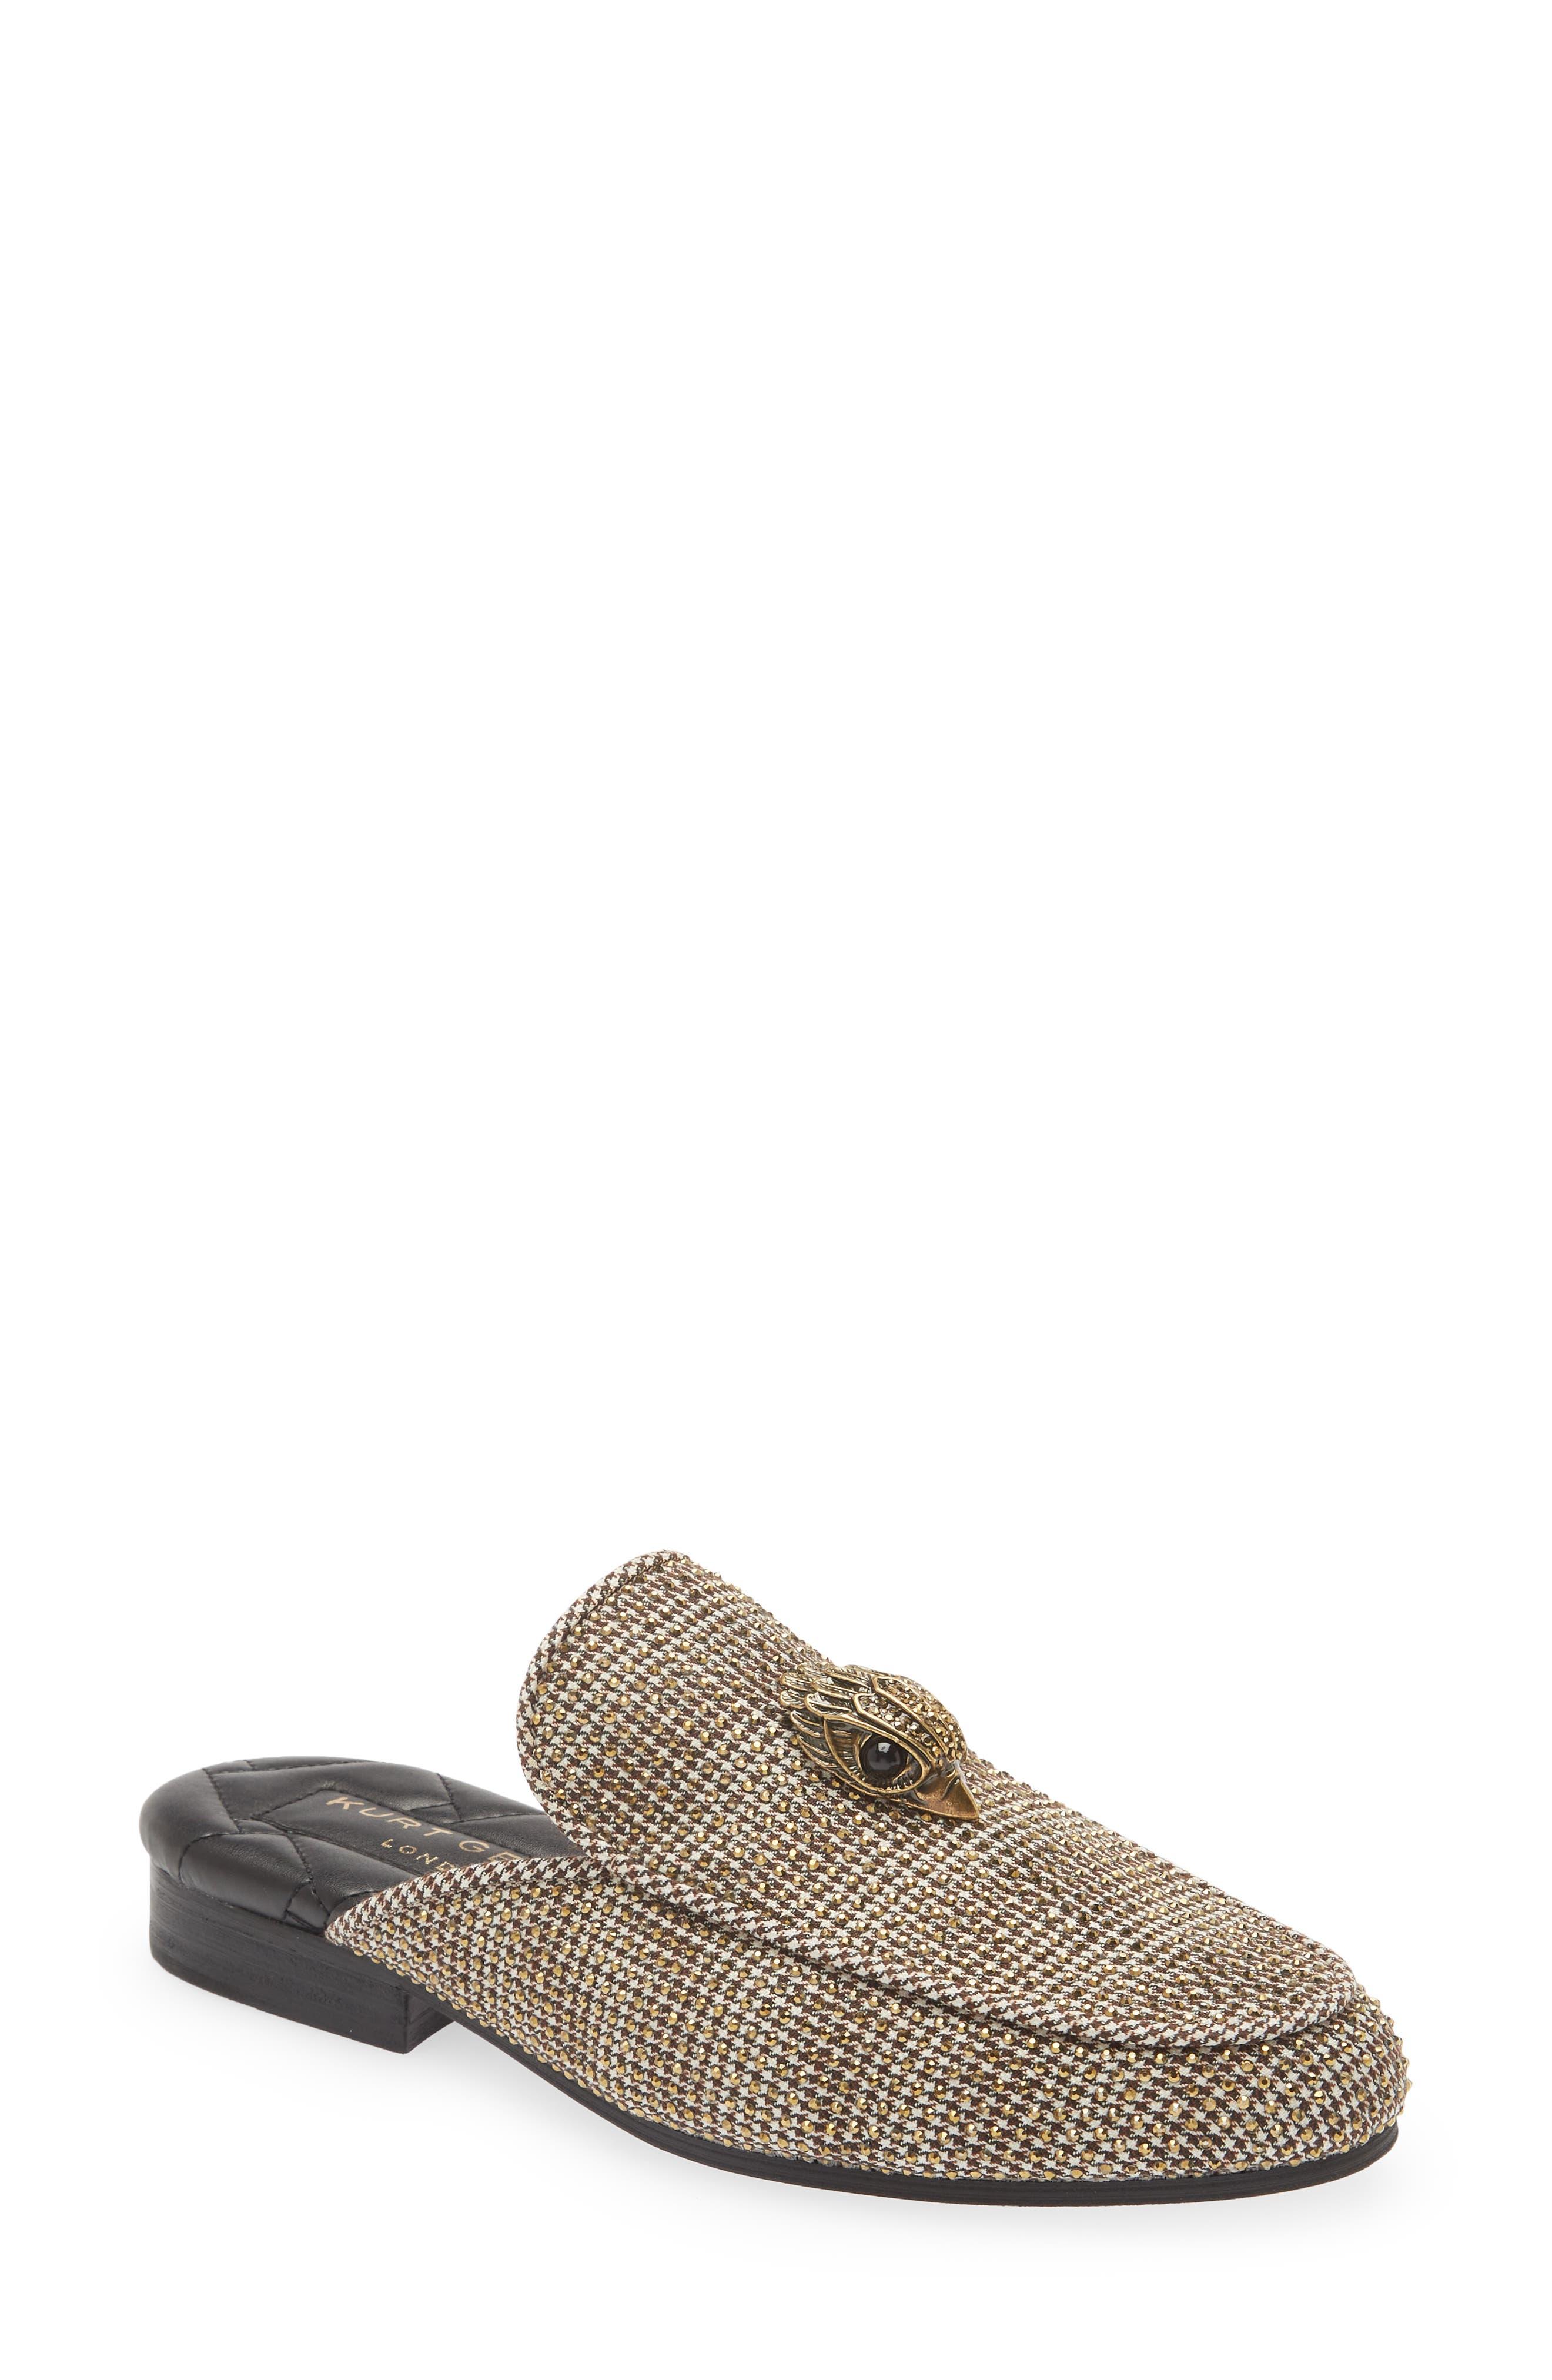 Kurt Geiger Holly Eagle Studded Mule in Natural | Lyst